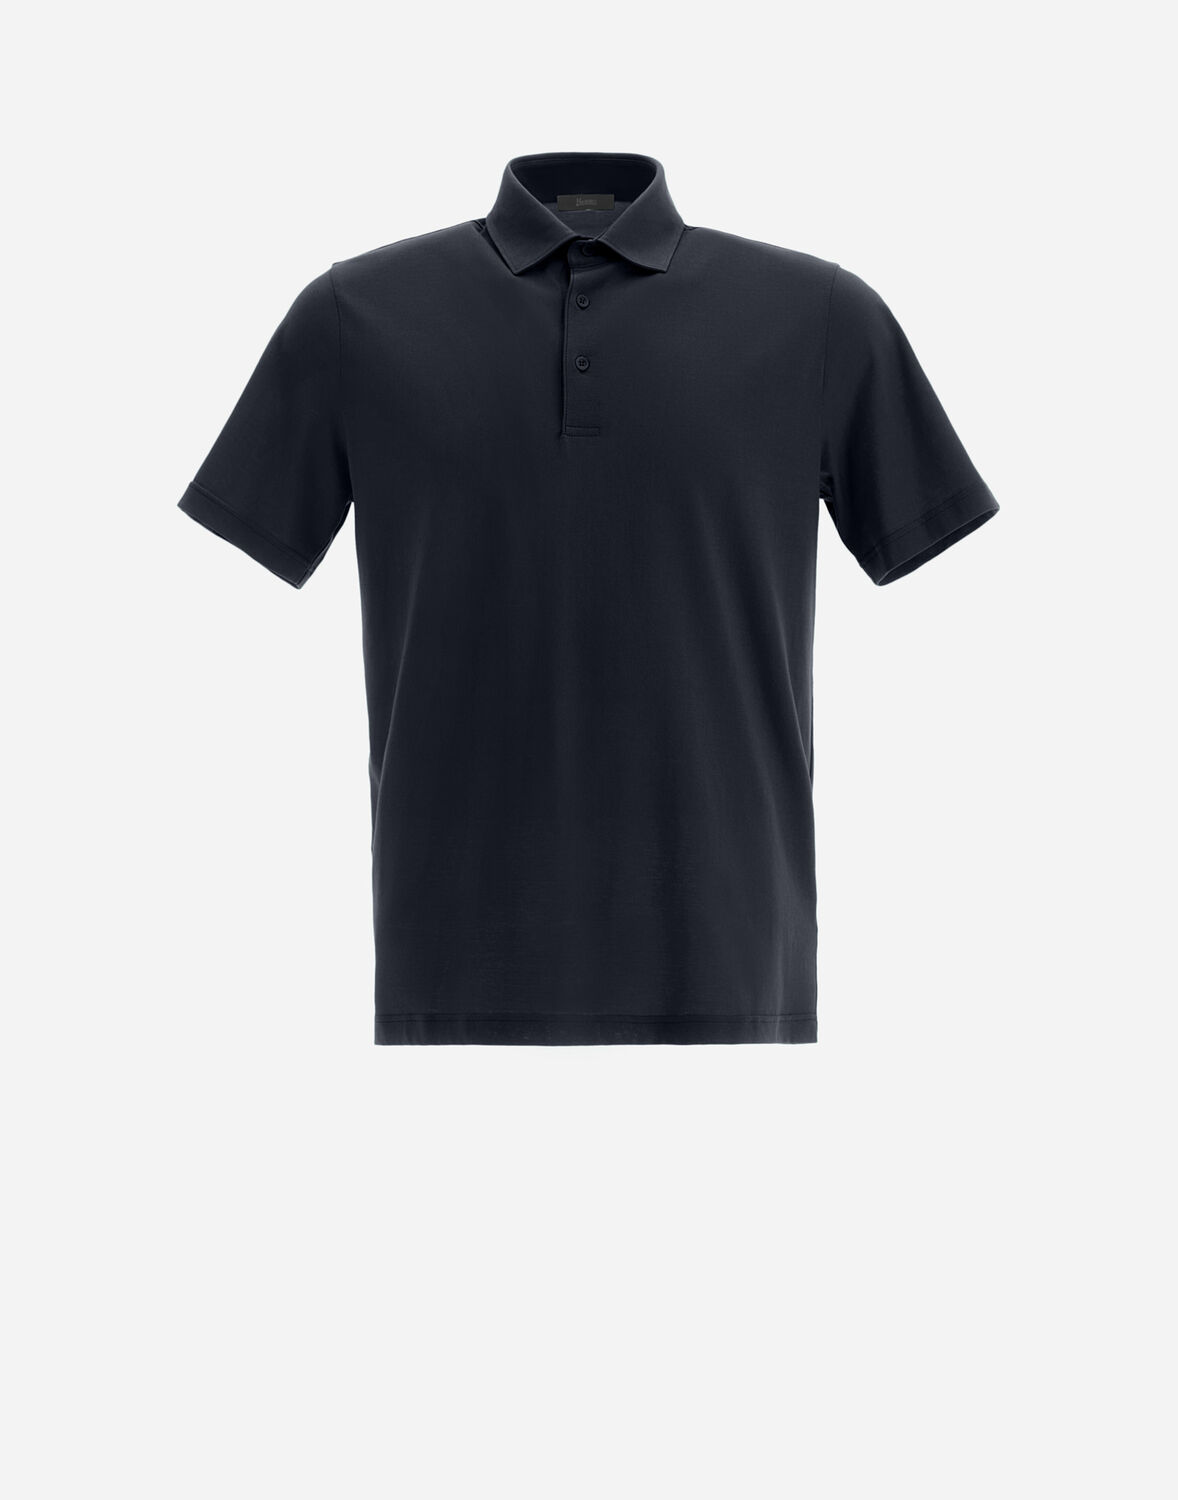 Herno Polo Shirt In Crepe Jersey - Male Men New Arrivals Navy Blue 62